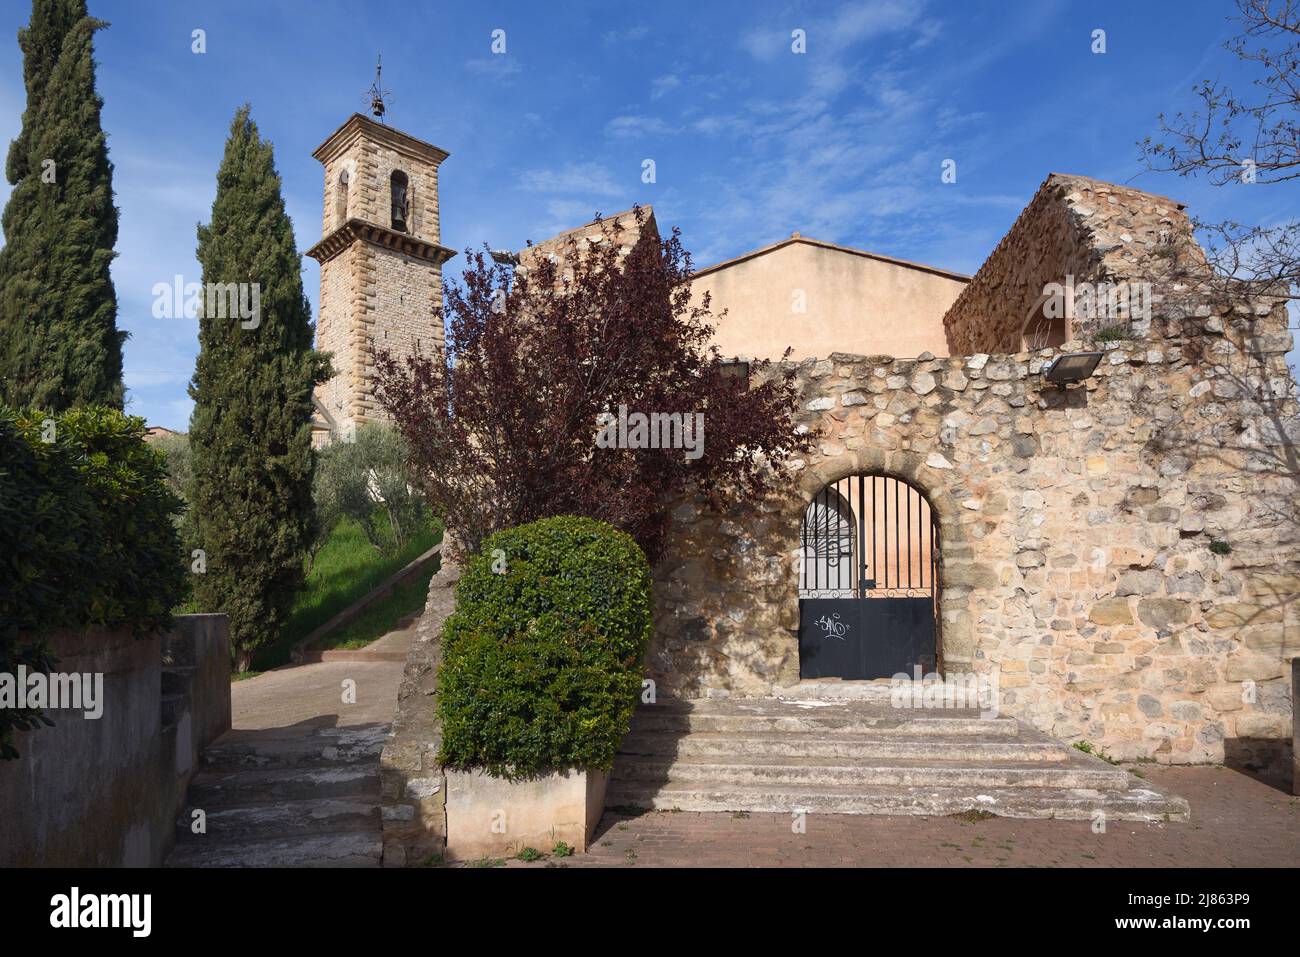 Museum or Chapel Saint Valentin or Penitents and c18th Belfry in the Old Town or Historic District Gardanne Bouches-du-Rhône Provence France Stock Photo